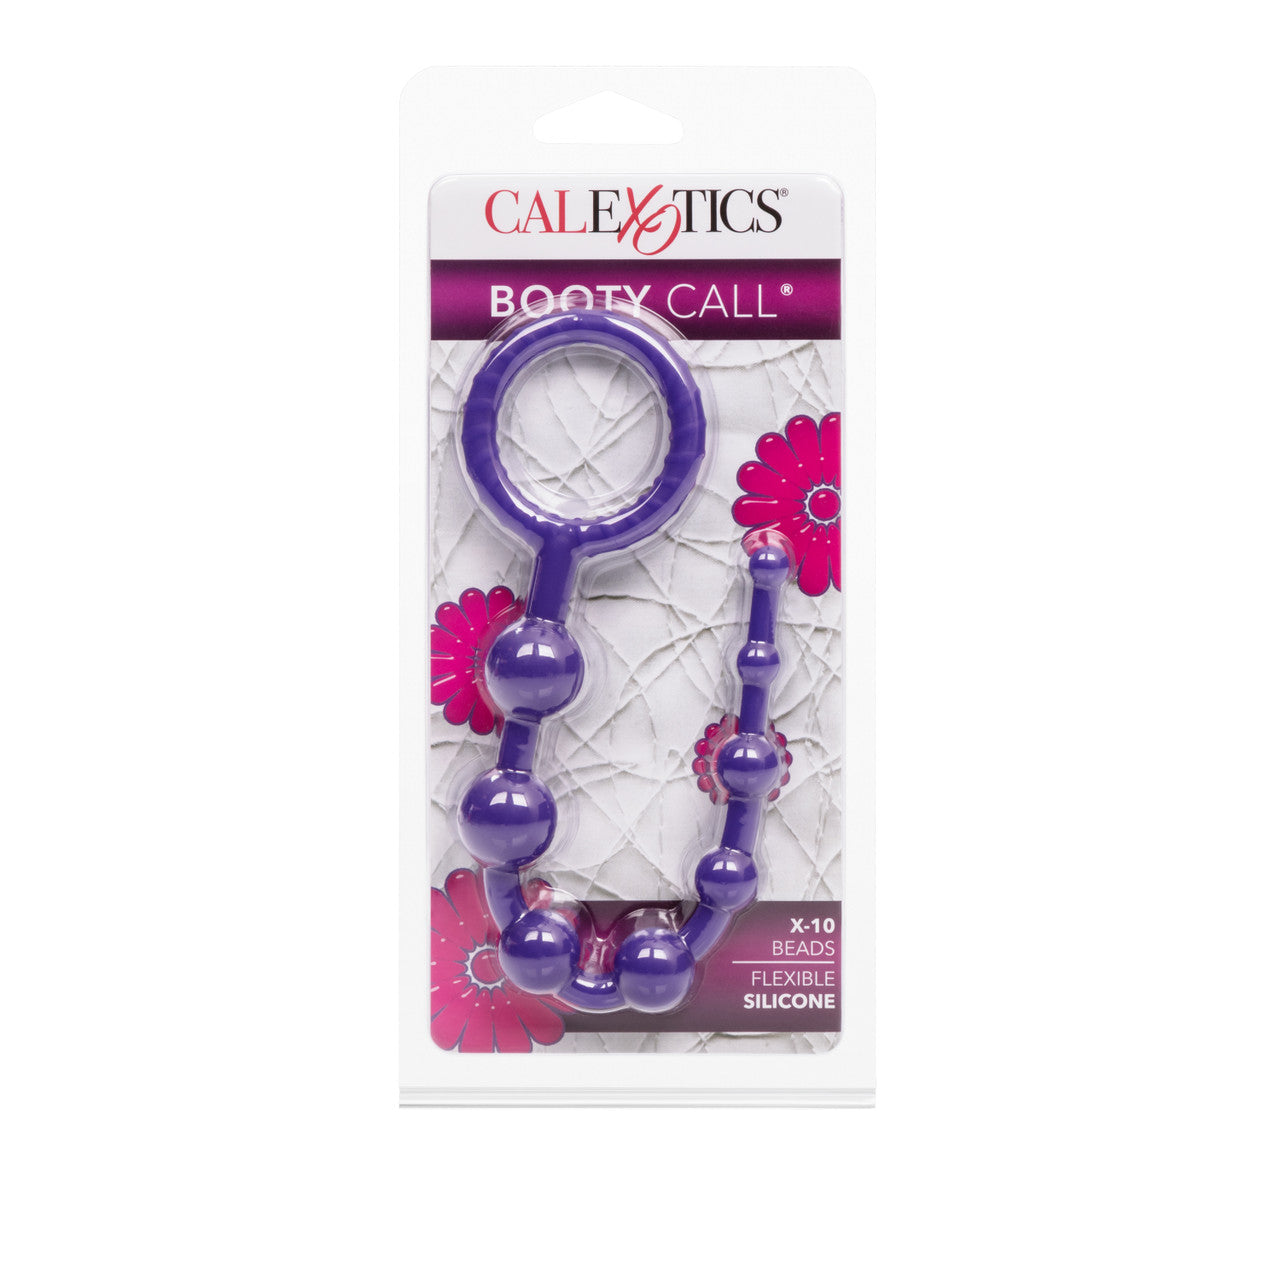 Booty Call X-10 Beads - Purple - Thorn & Feather Sex Toy Canada